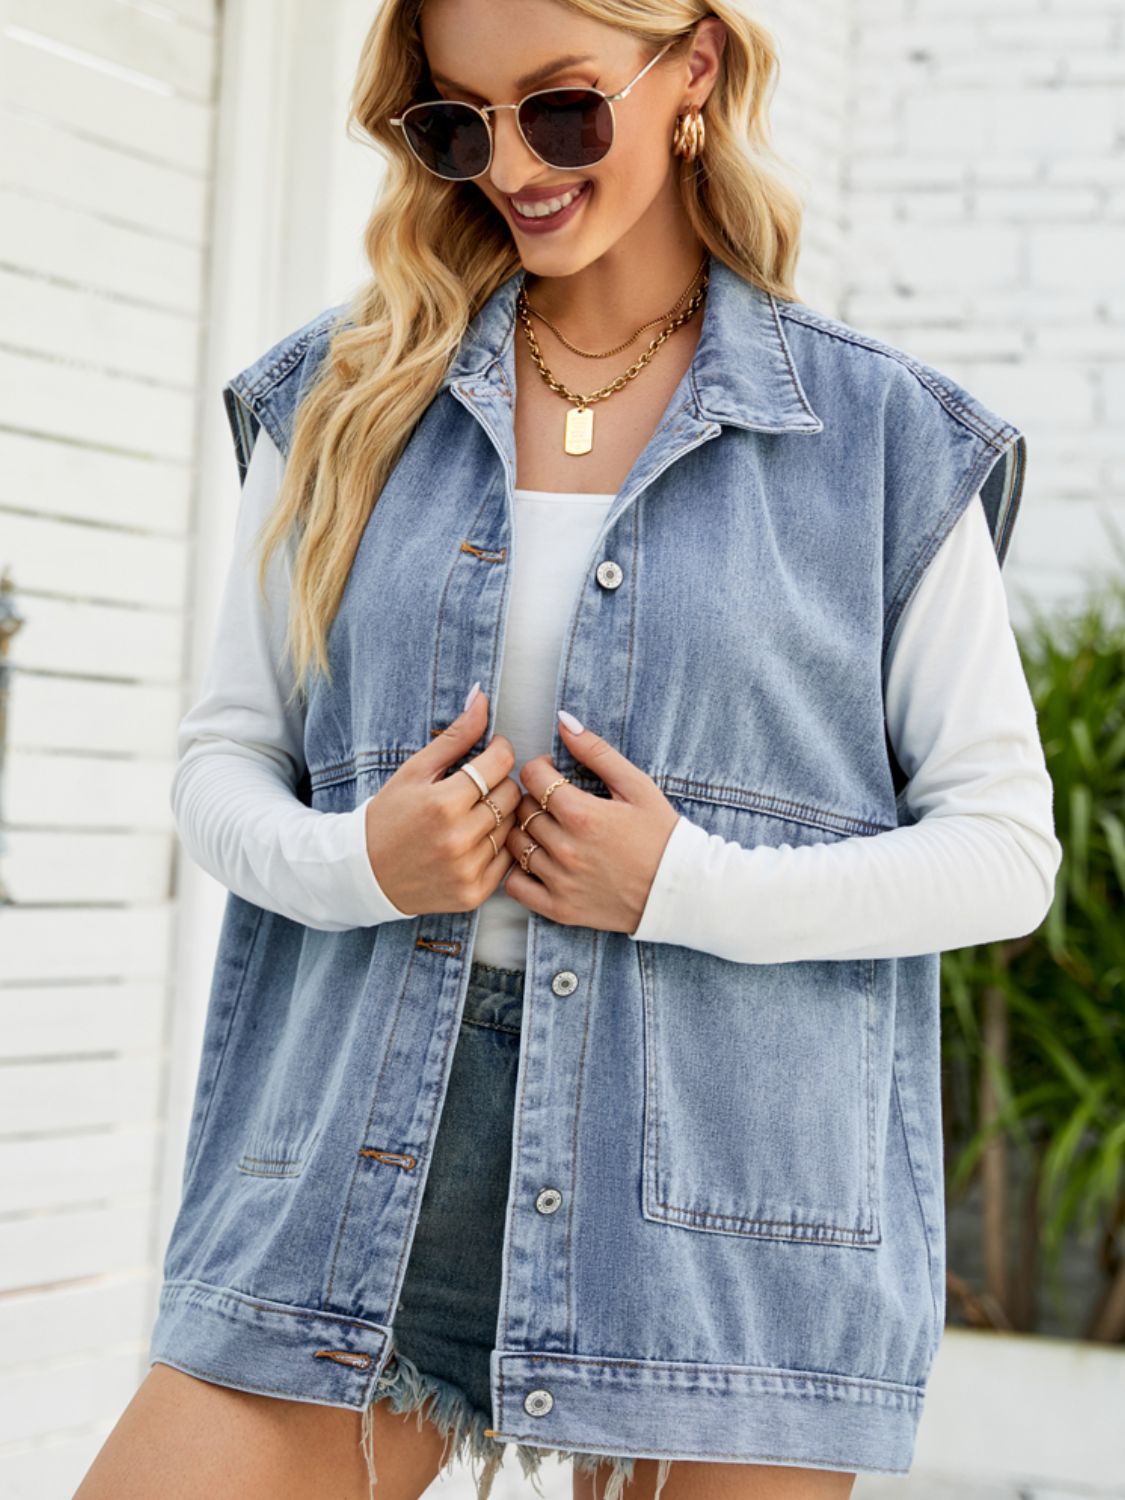 Collared Neck Sleeveless Denim Top with Pockets king-general-store-5710.myshopify.com